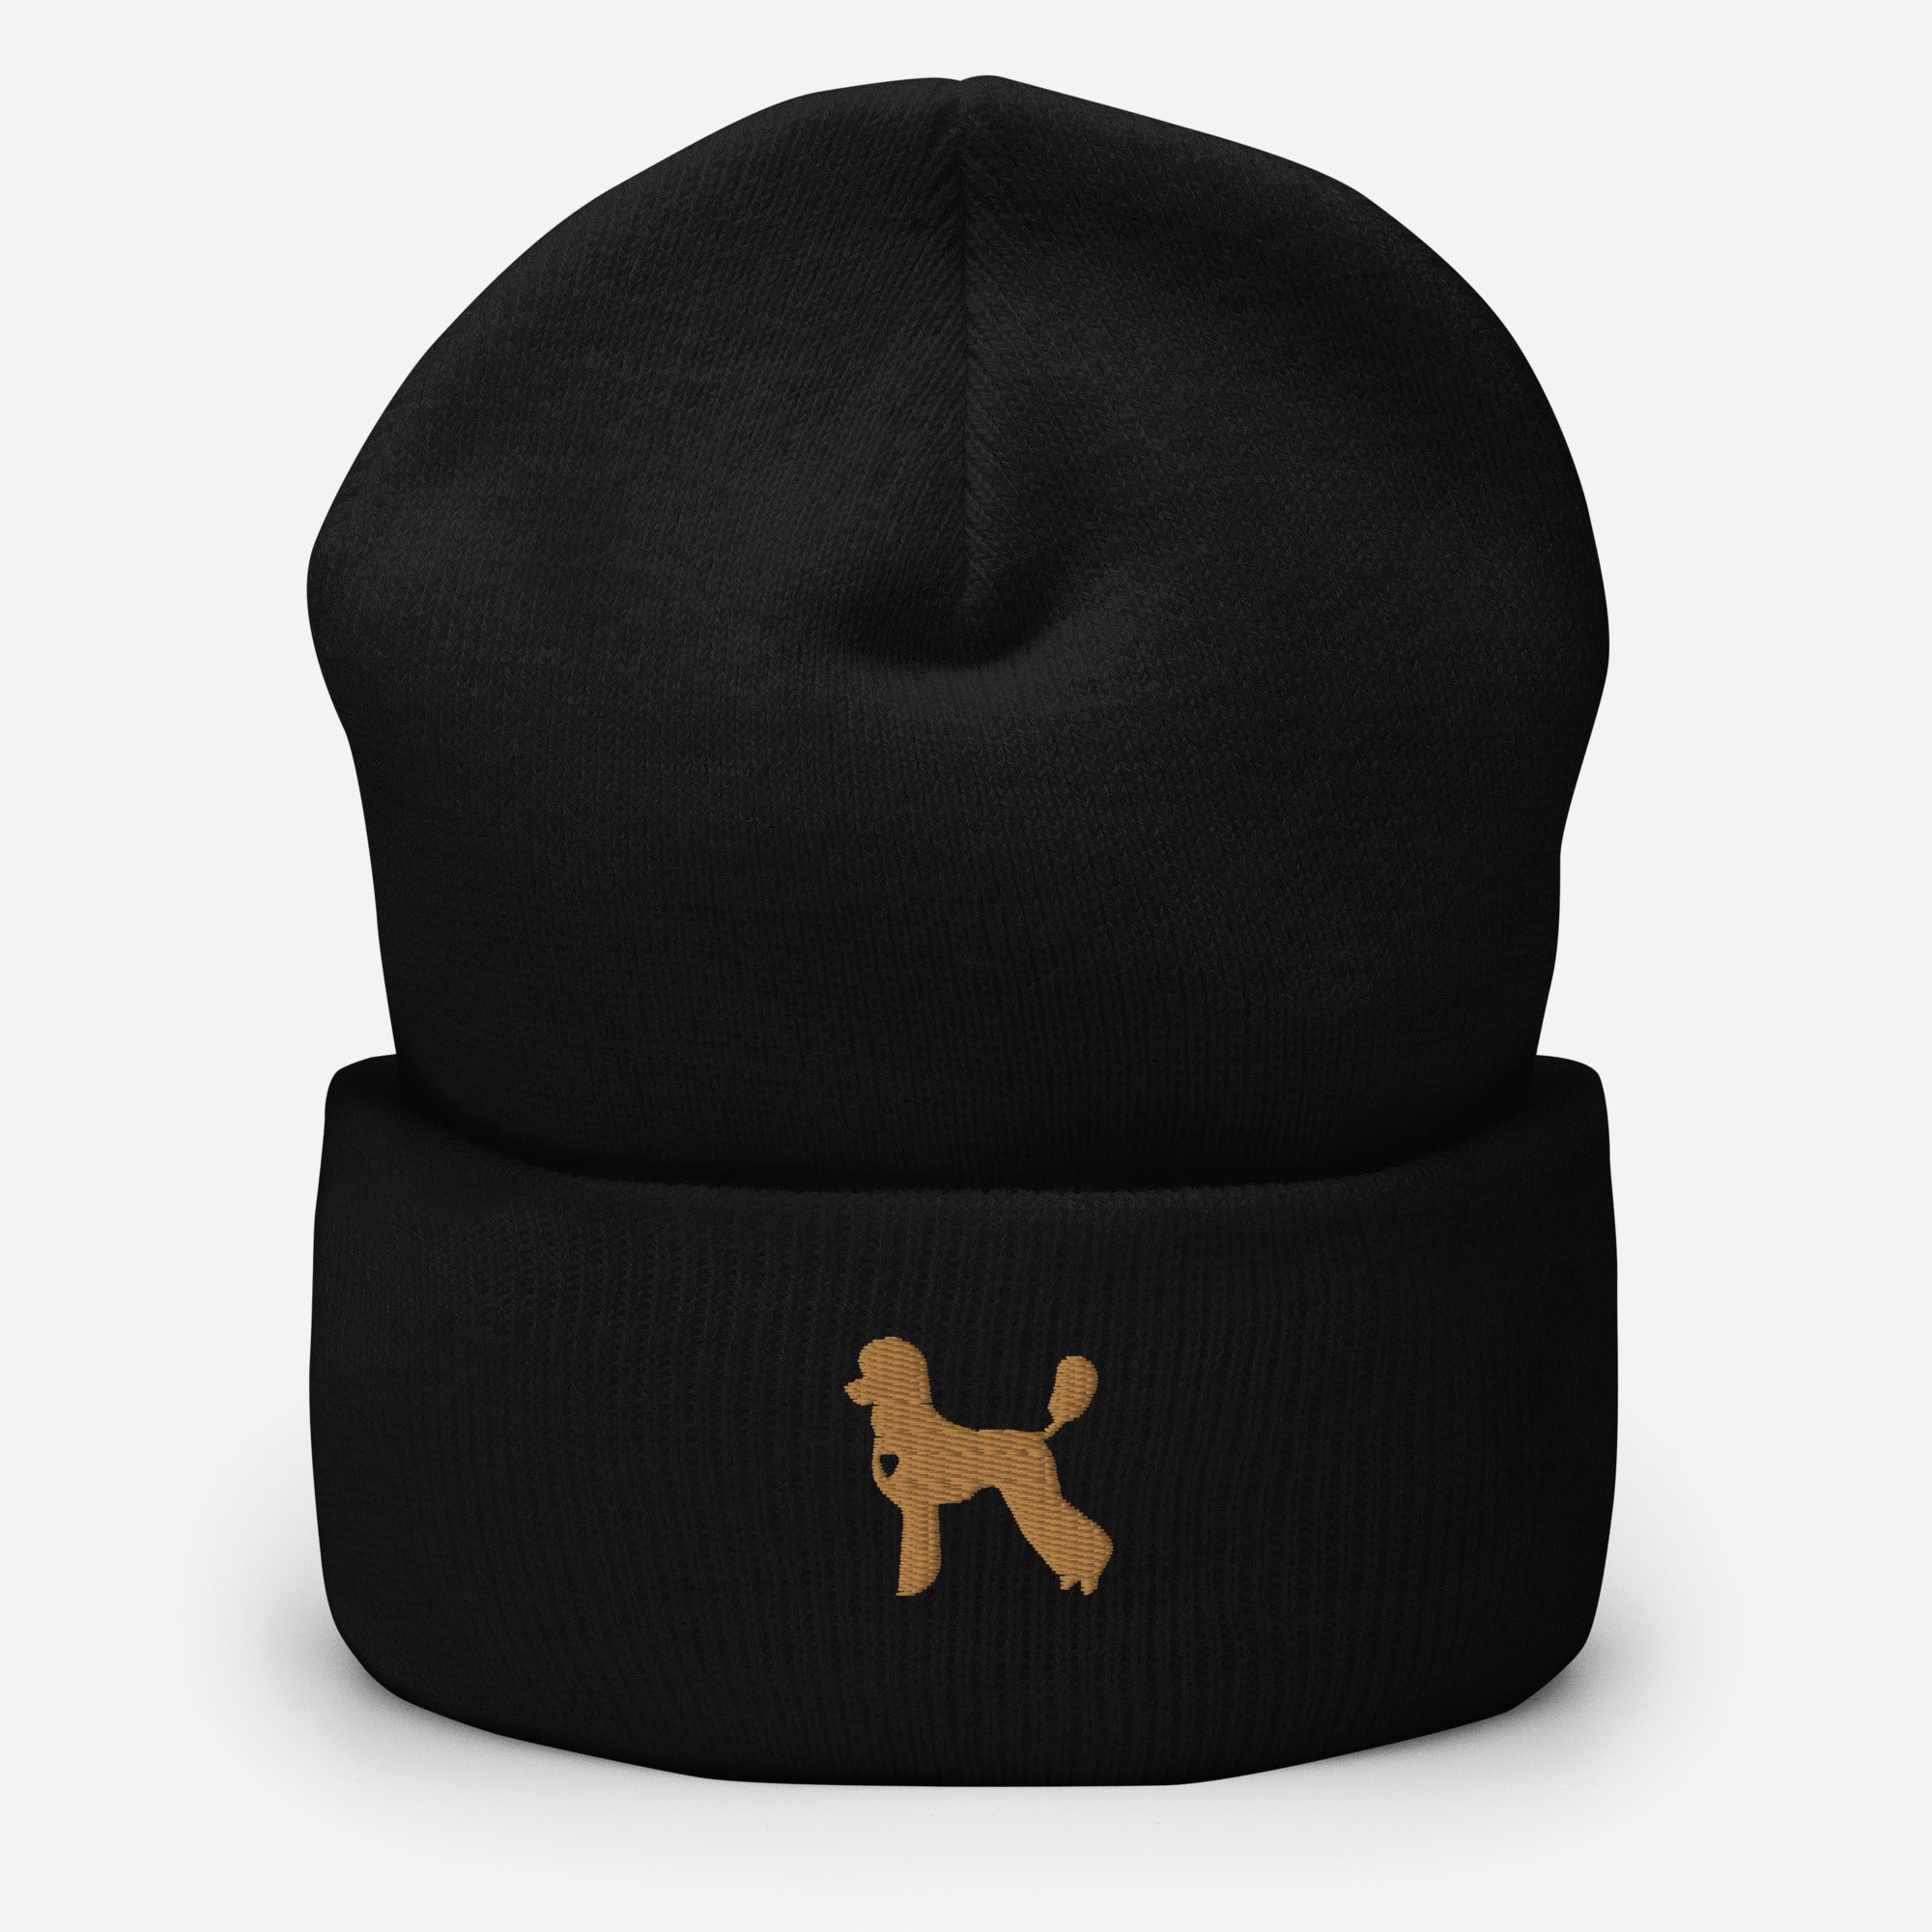 Poodle Gold Heart Beanie